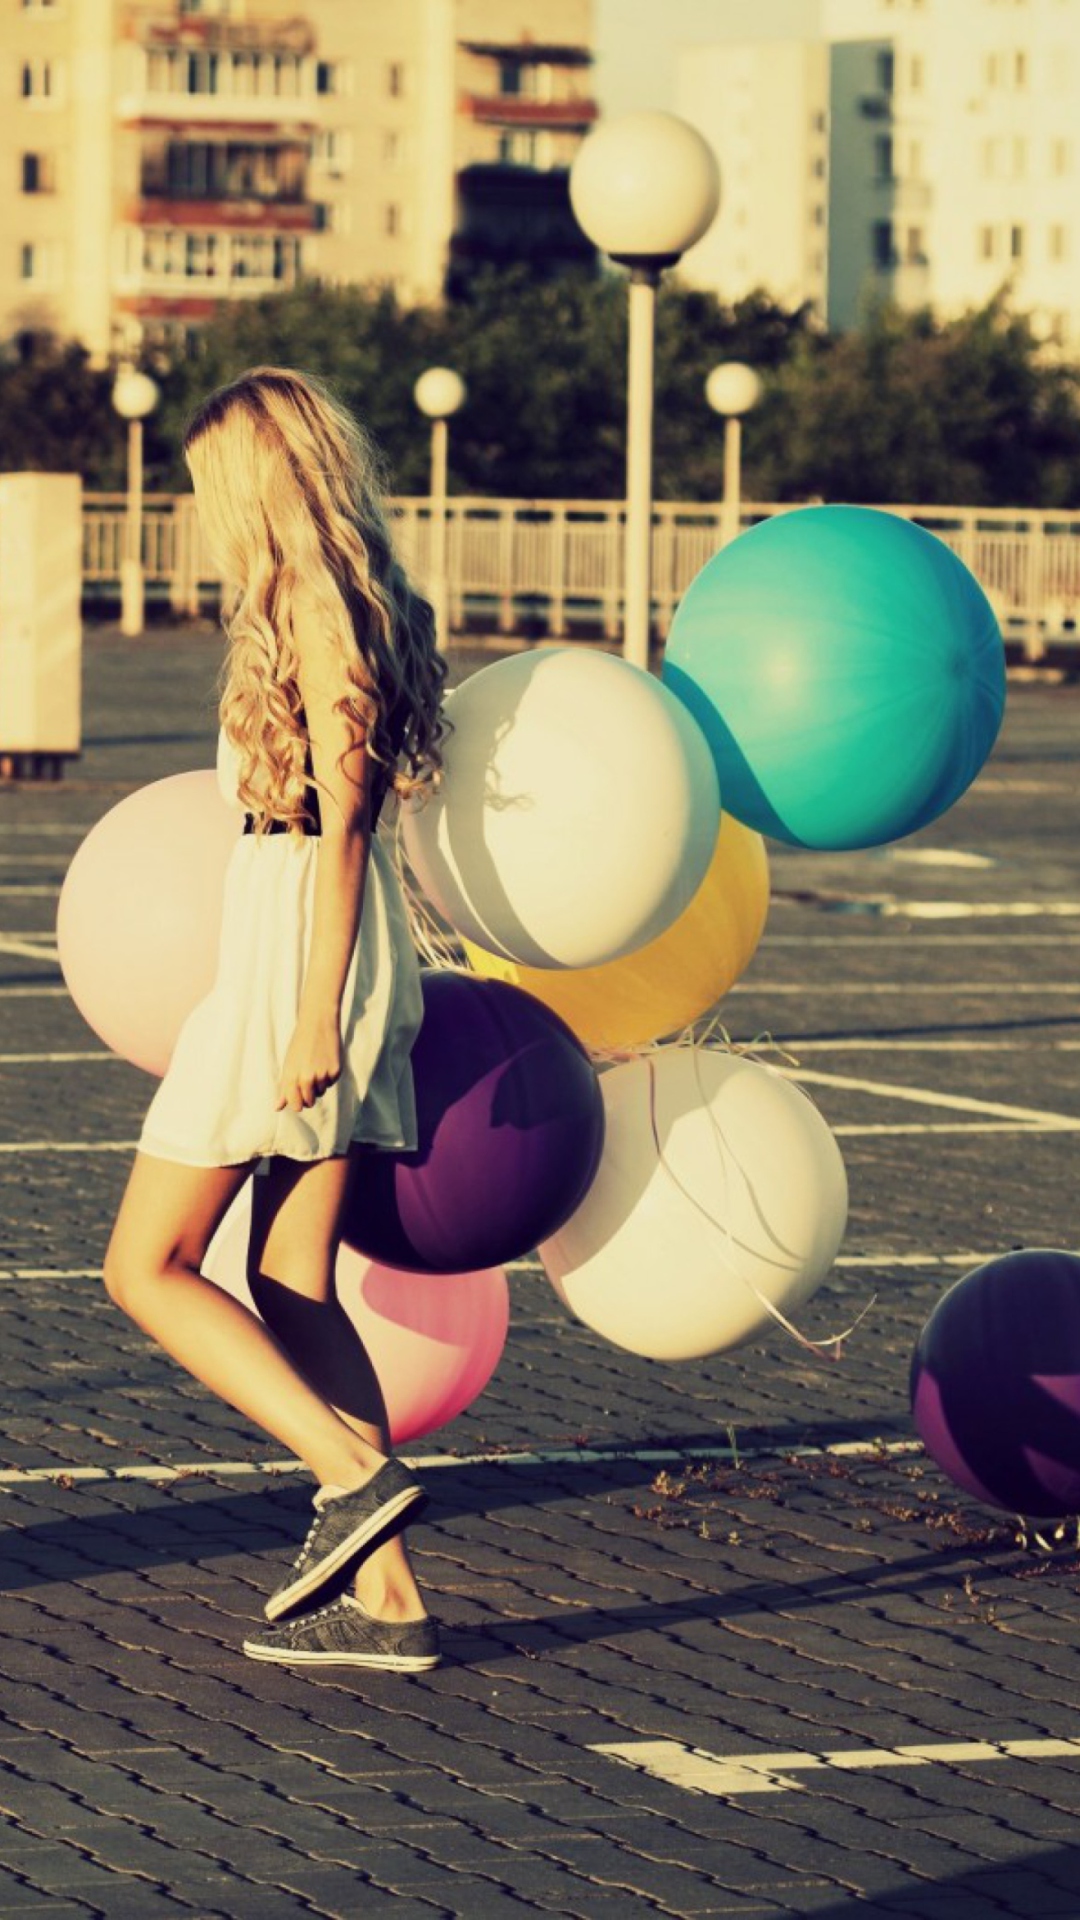 Happy Girl With Colorful Balloons wallpaper 1080x1920